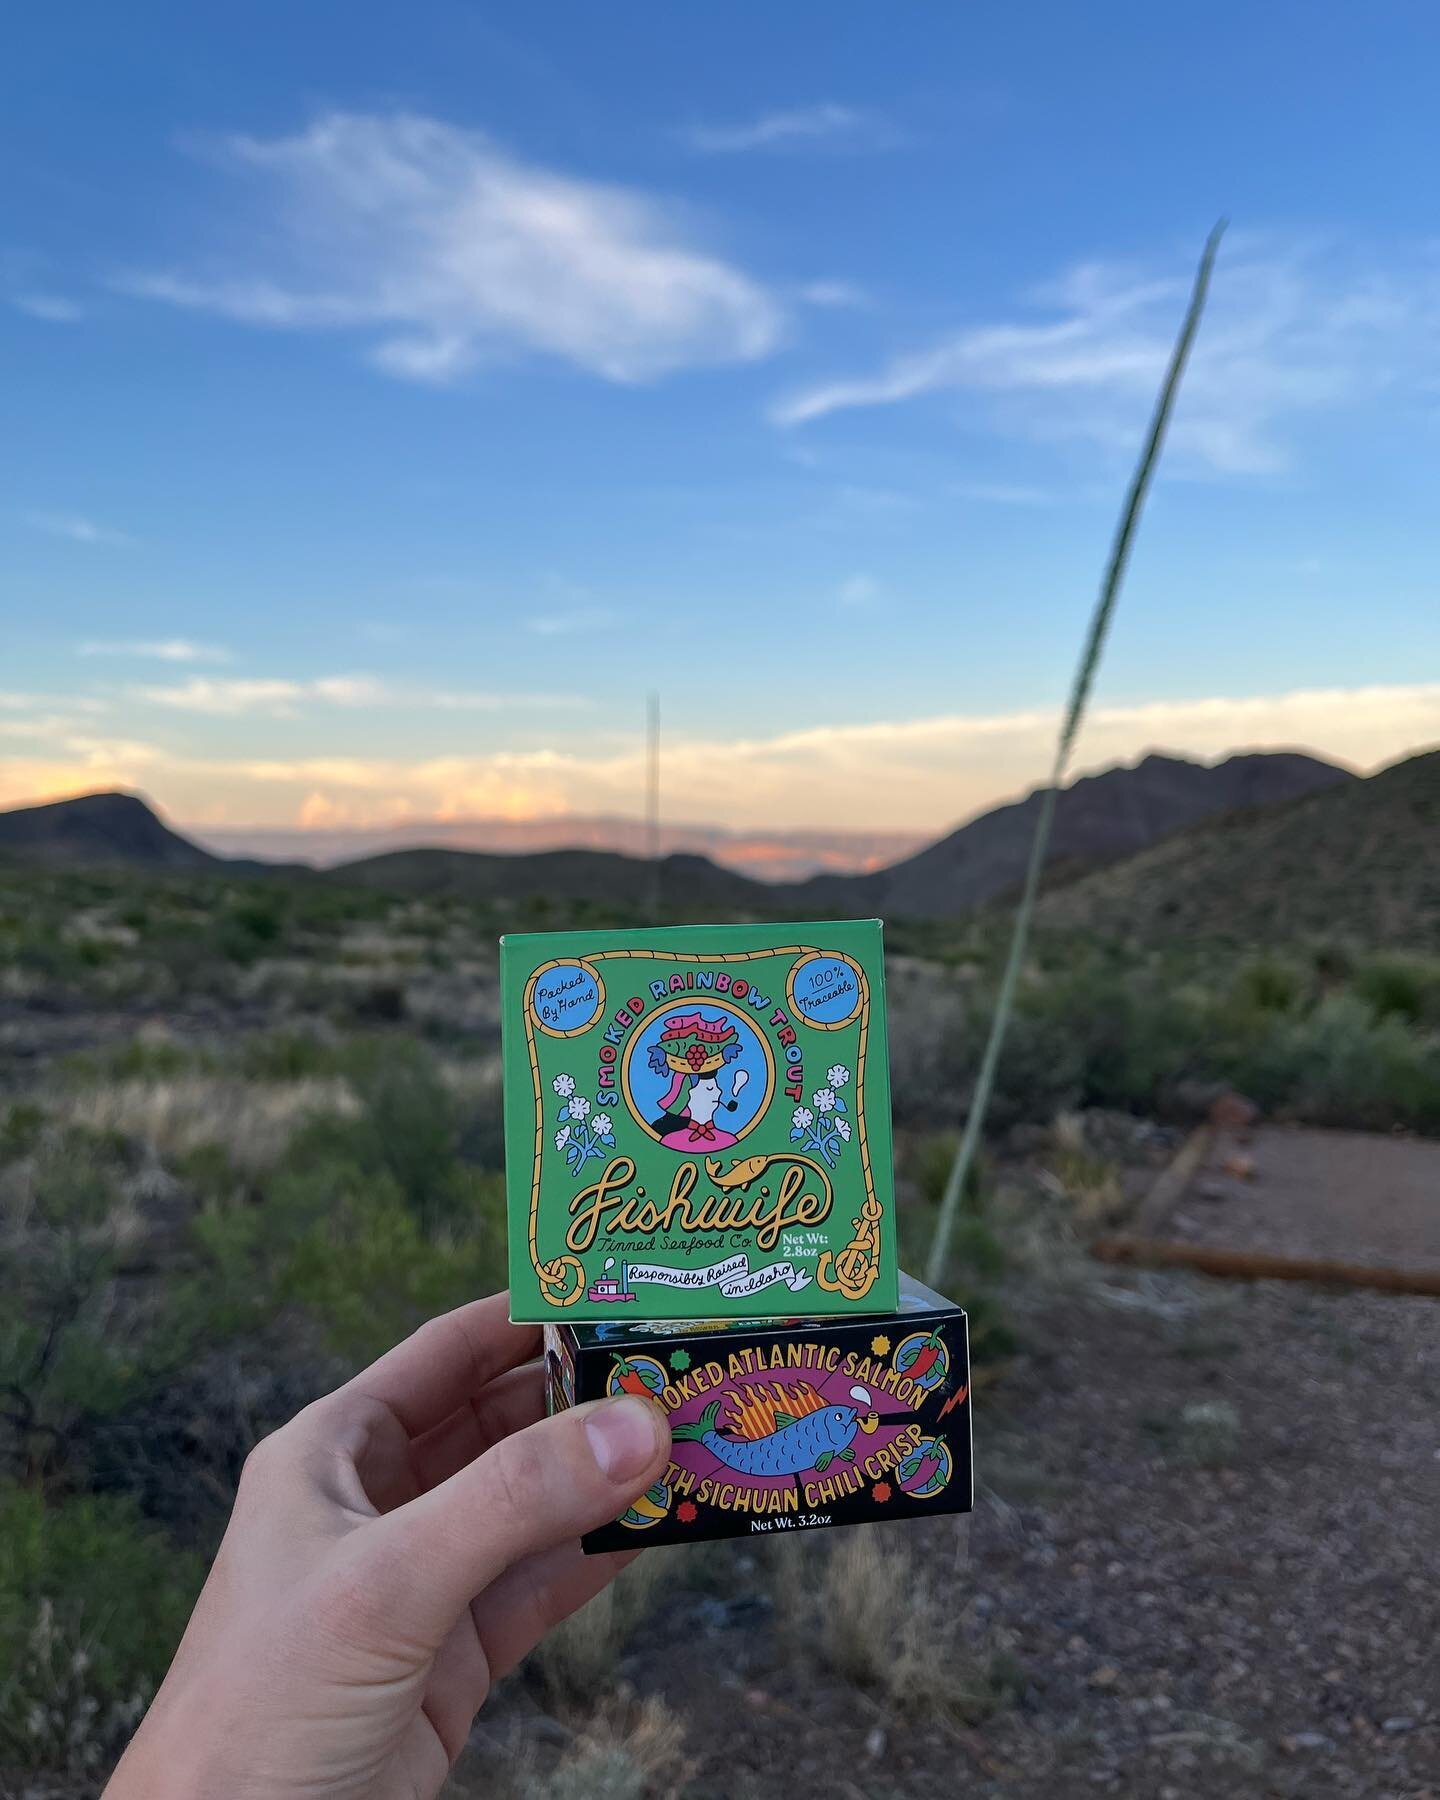 Usually sardines are my go to backcountry camping snack. This year I&rsquo;m so happy to add in the new varieties we carry in the shop! Killer after a long hike in the desert, or a long drive, or just chillin by a fire. 🏜️🏕️🔥 @fishwife @bigbendnps